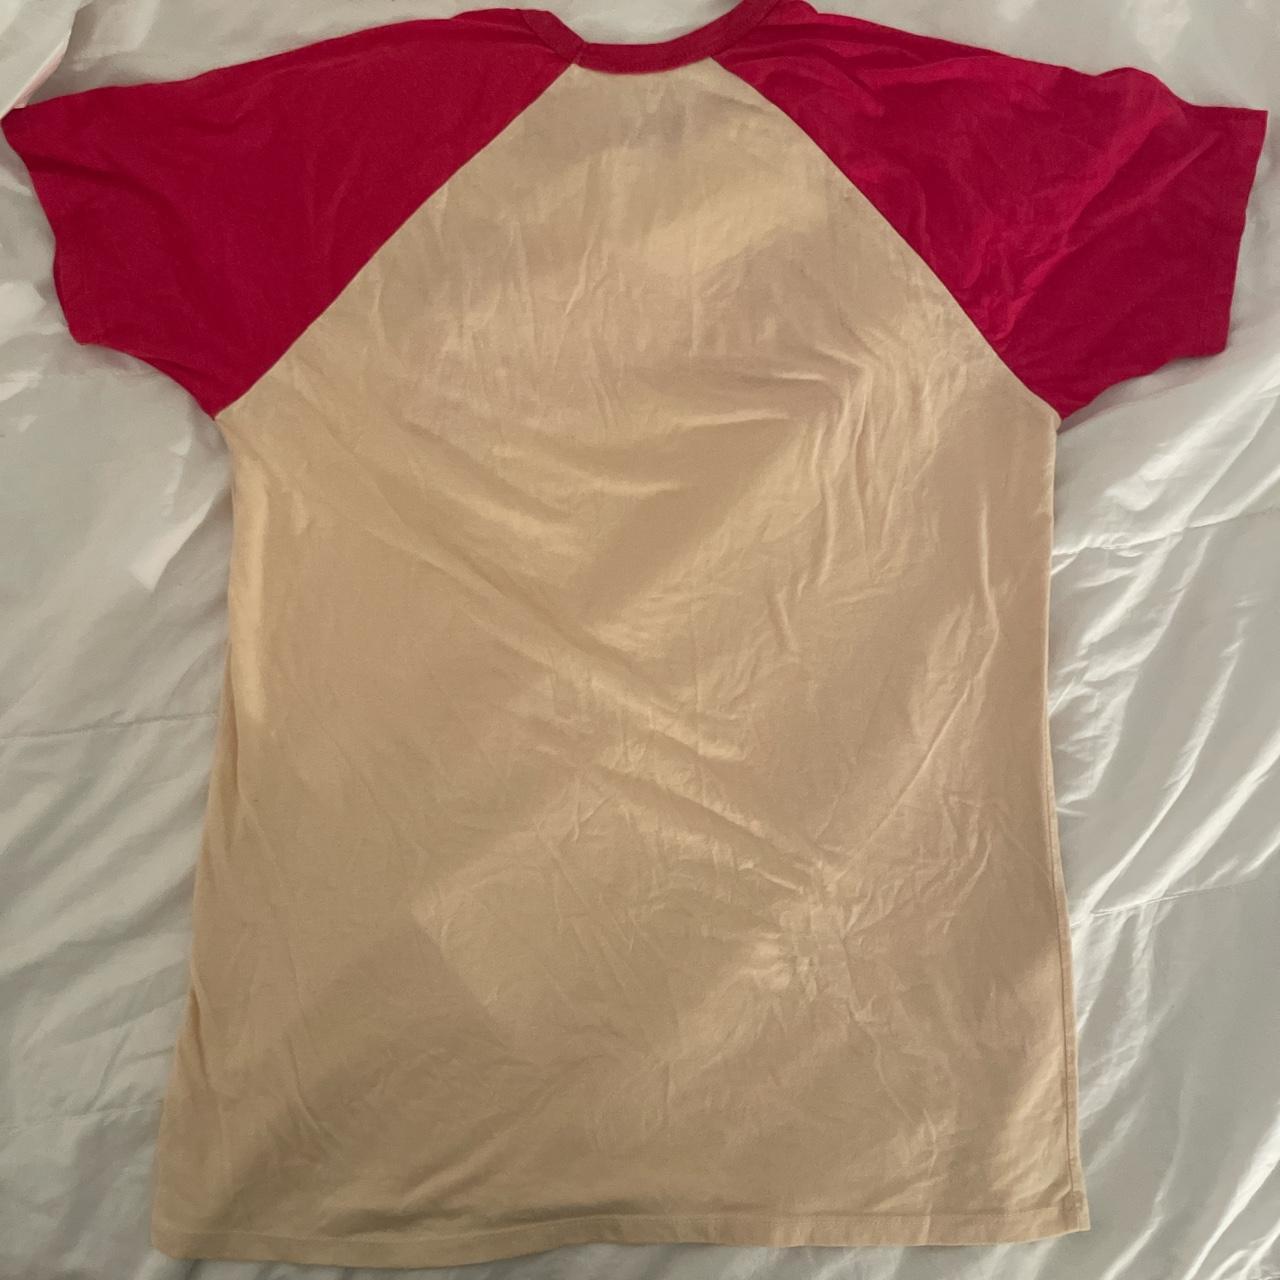 Urban Outfitters Men's Cream and Red T-shirt (3)